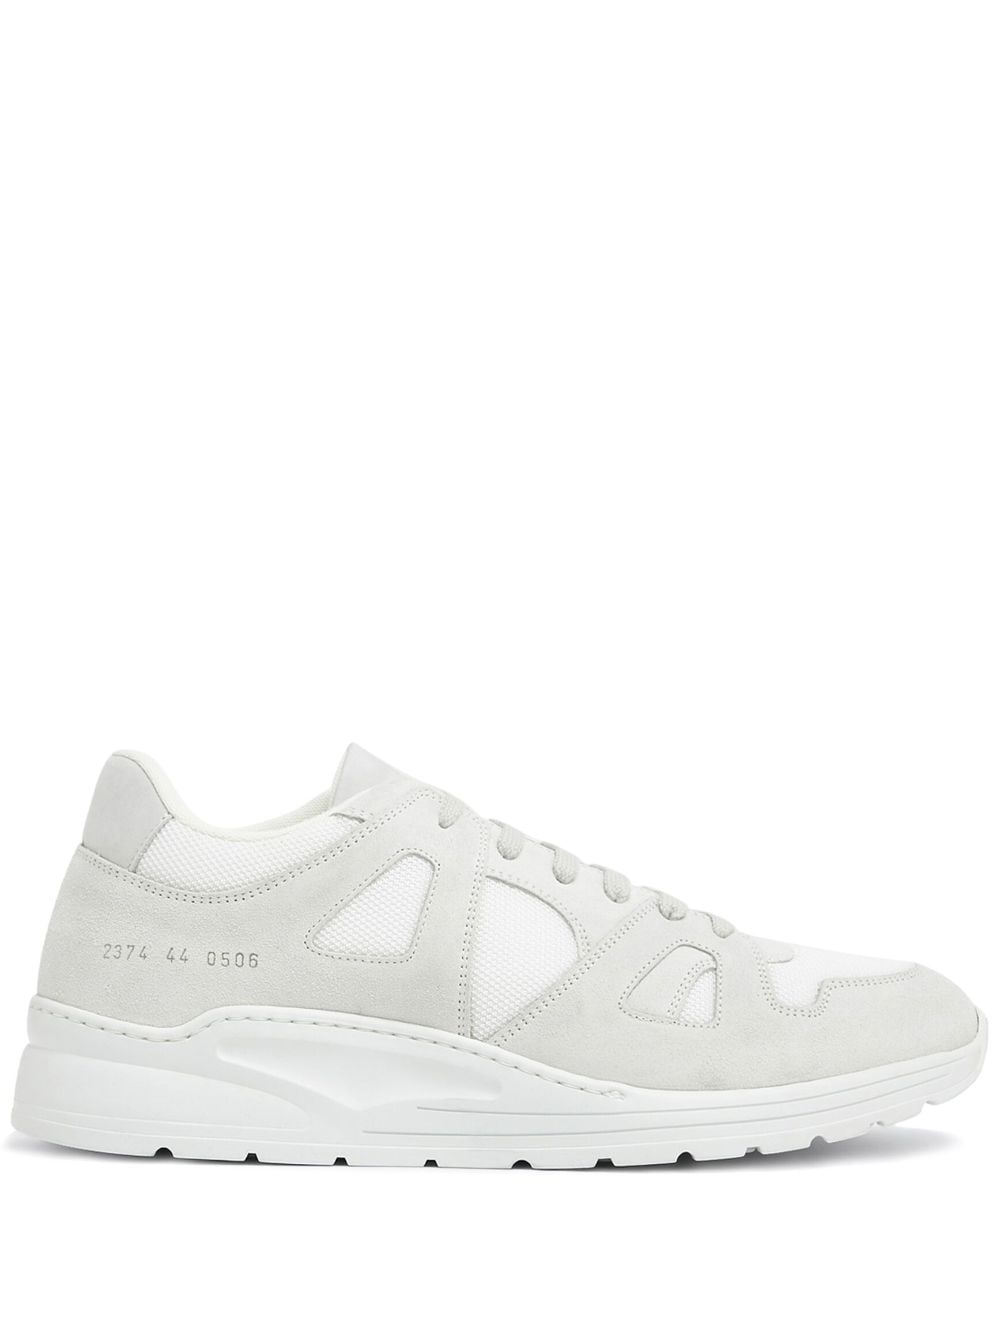 COMMON PROJECTS CROSS TRAINER PANELLED SNEAKERS